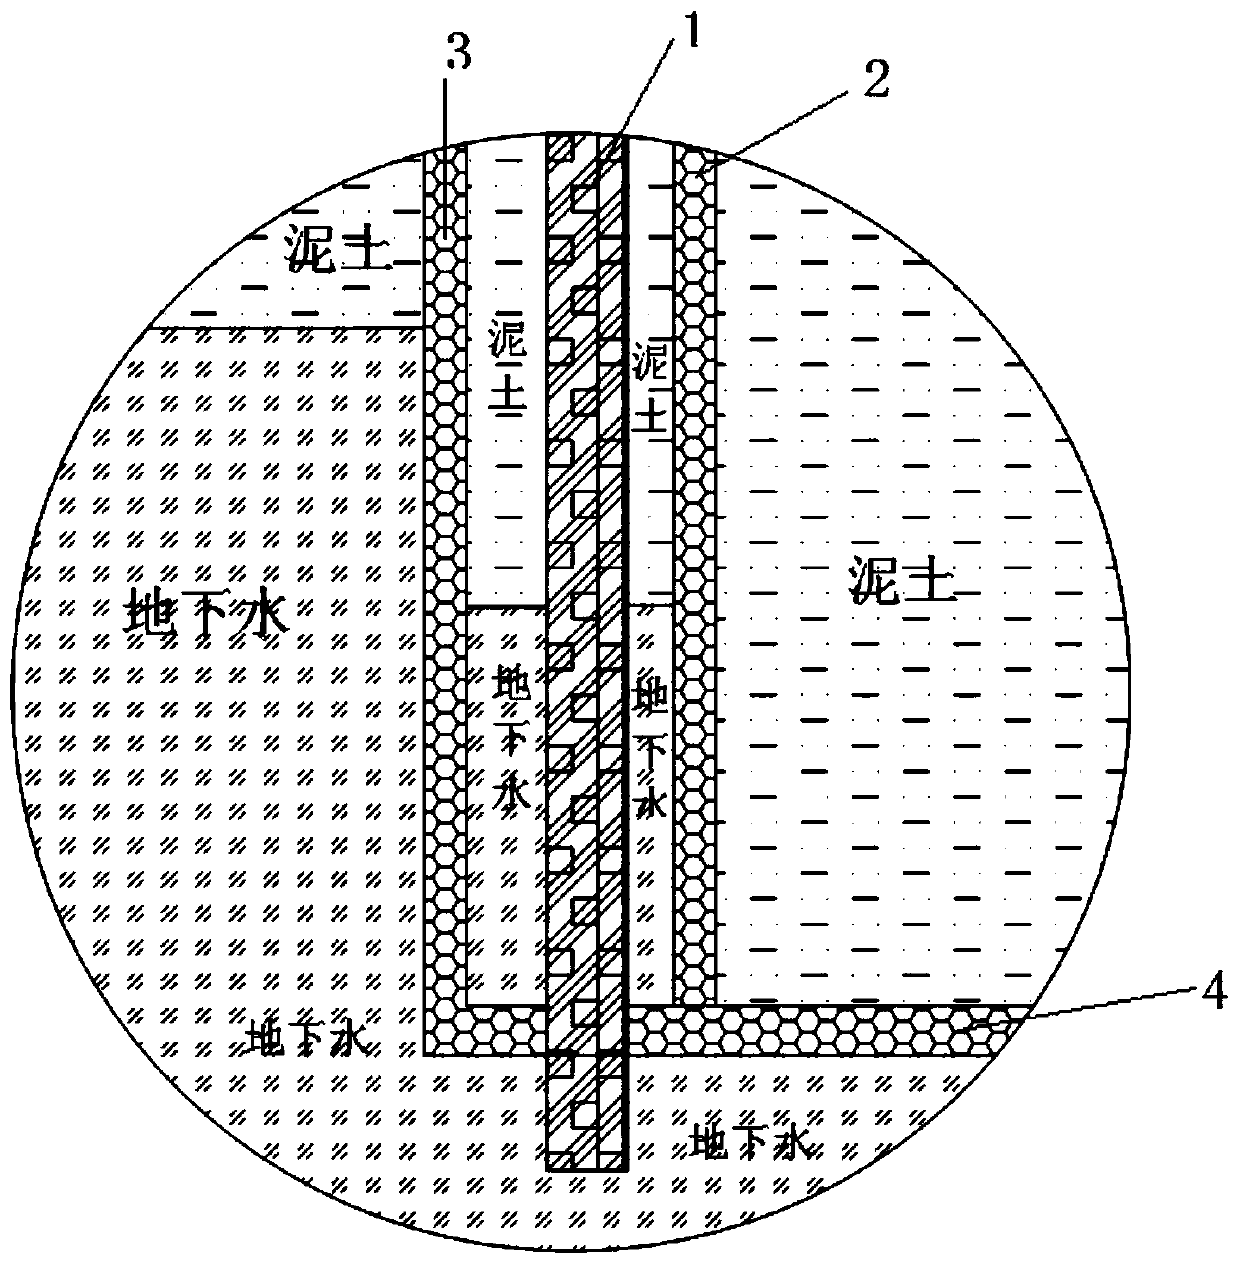 Shield receiving well foundation pit excavation and supporting non-precipitation construction method